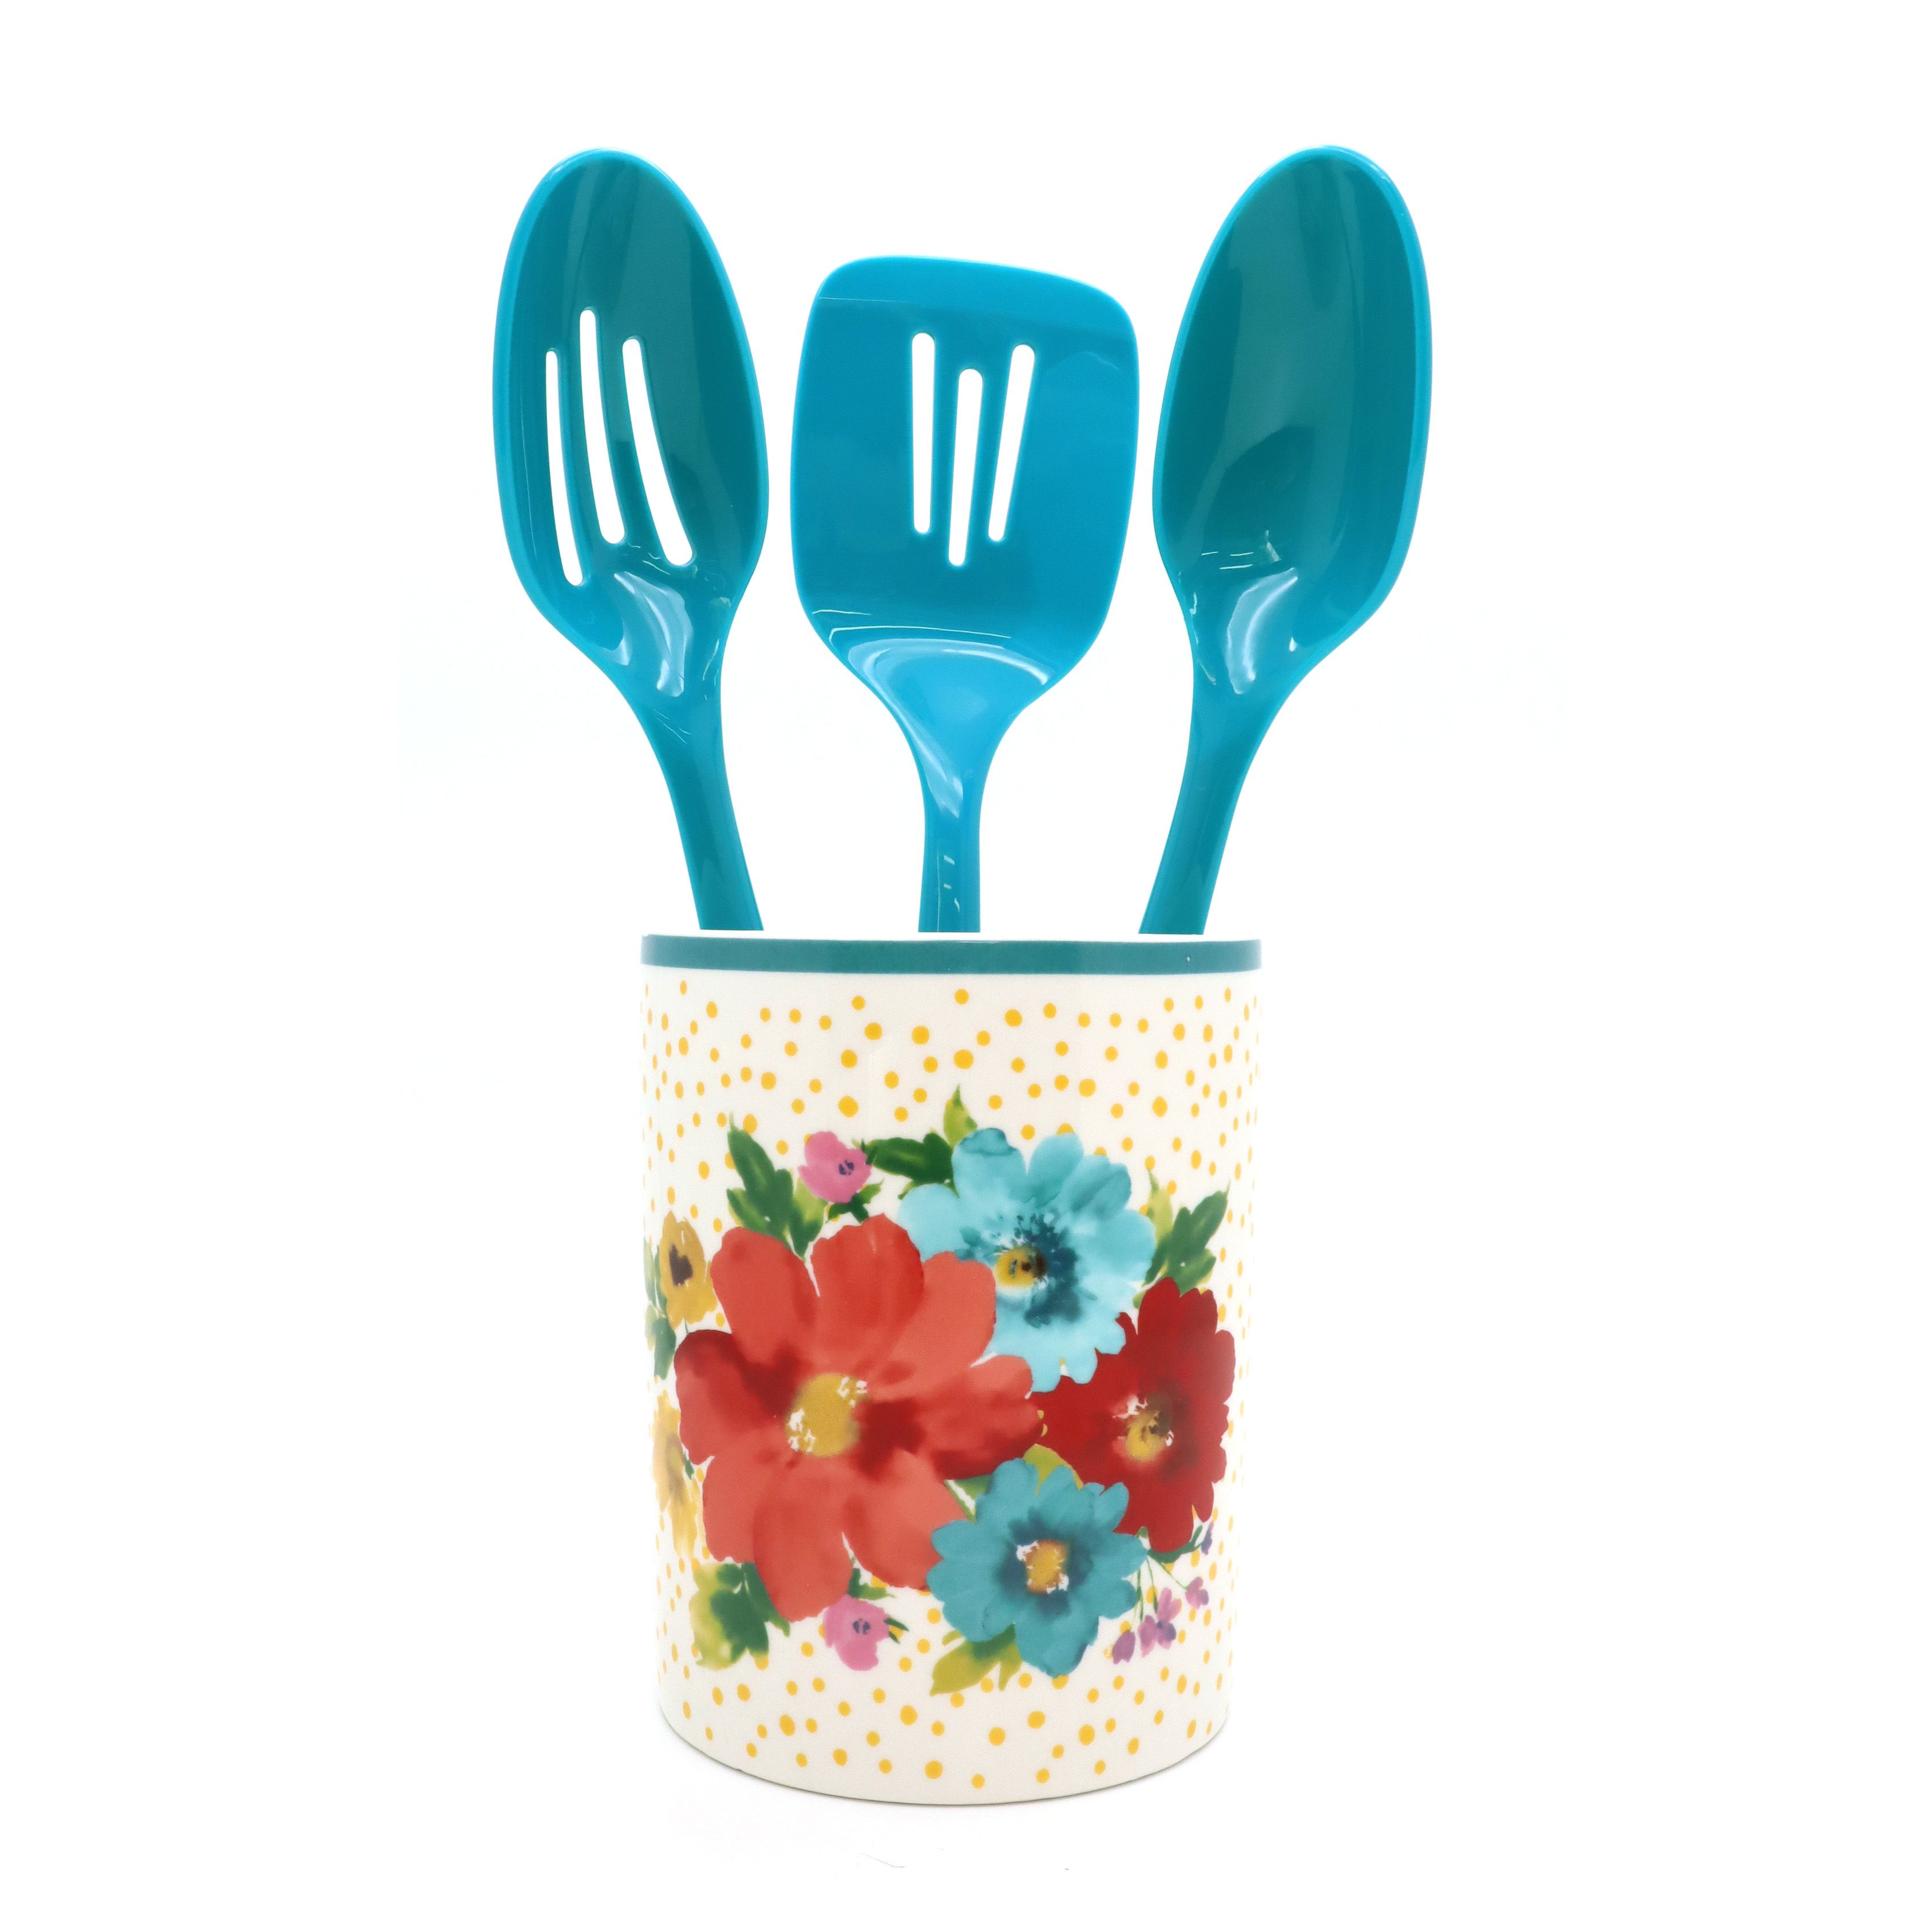 The Pioneer Woman Breezy Blossom 20-Piece Tool and Crock Set - image 2 of 7